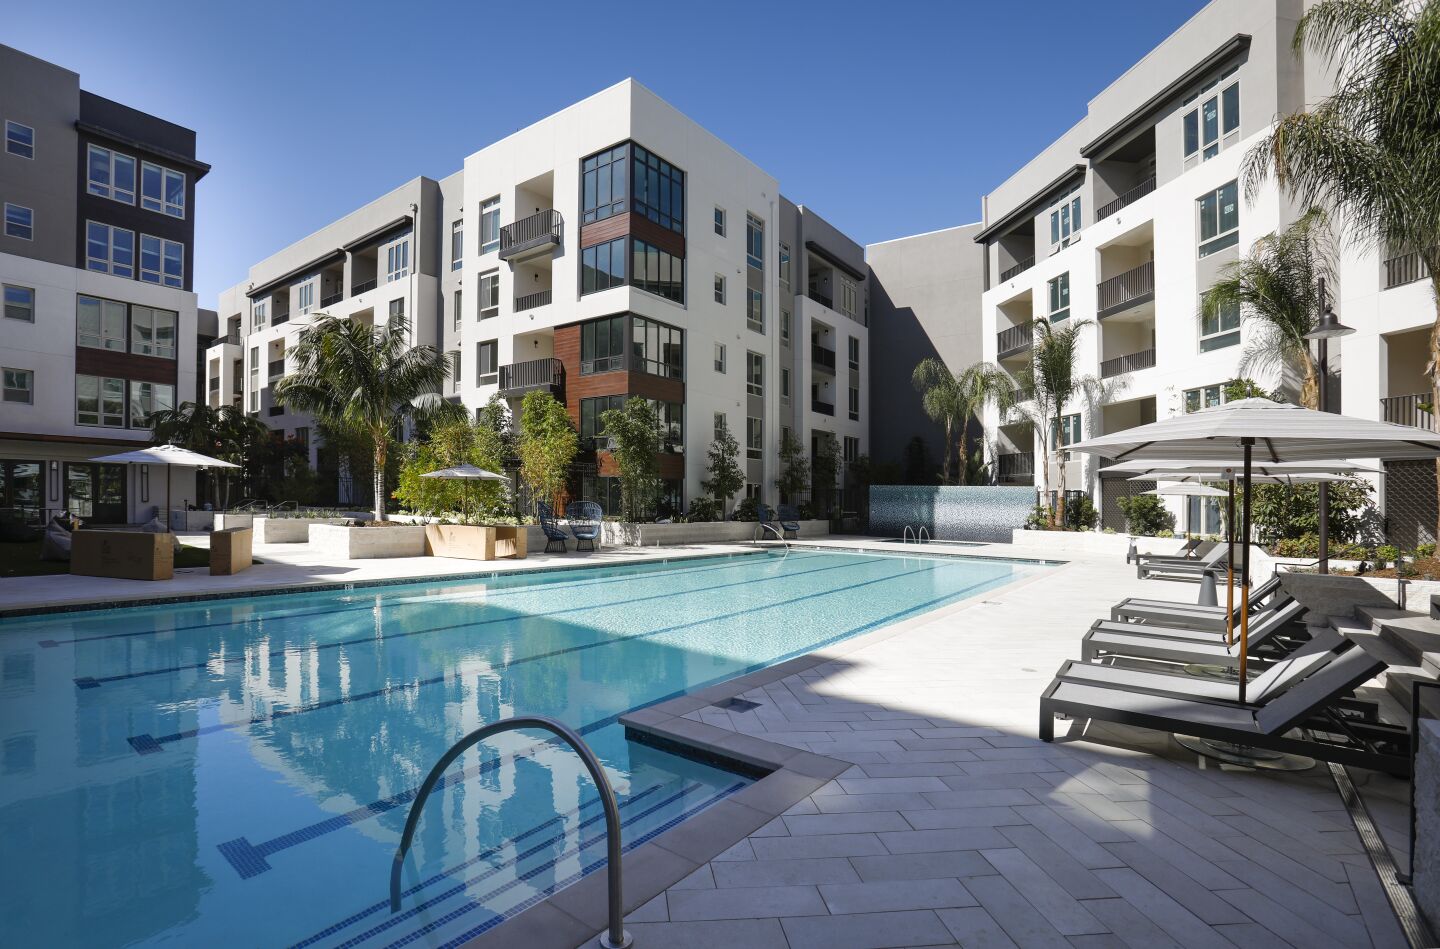 One of two swimming pools at One Paseo, the upscale apartment homes project in Carmel Valley, part of the 23-acre, $600 million-plus mixed-use development. Photographed October 8, 2019, in San Diego, California.